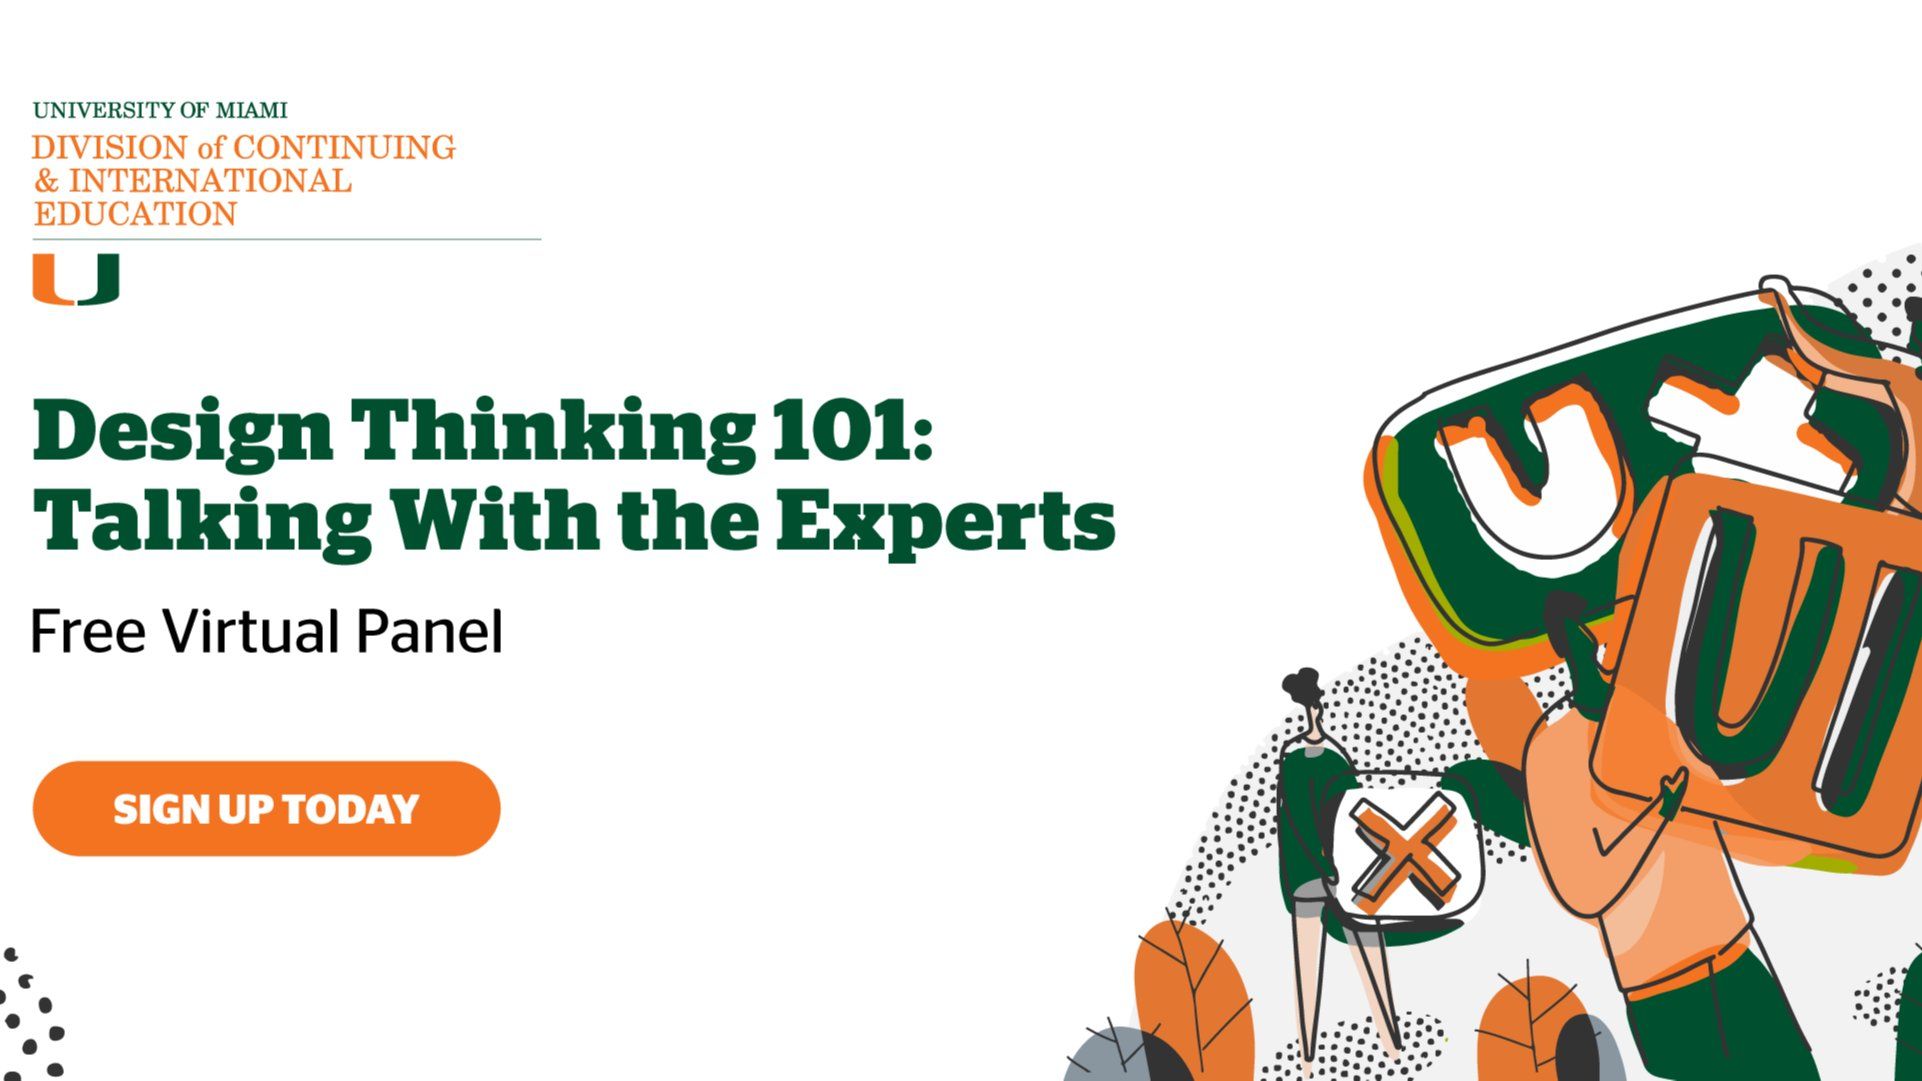 Design Thinking 101: Talking With the Experts | Virtual Panel Discussion